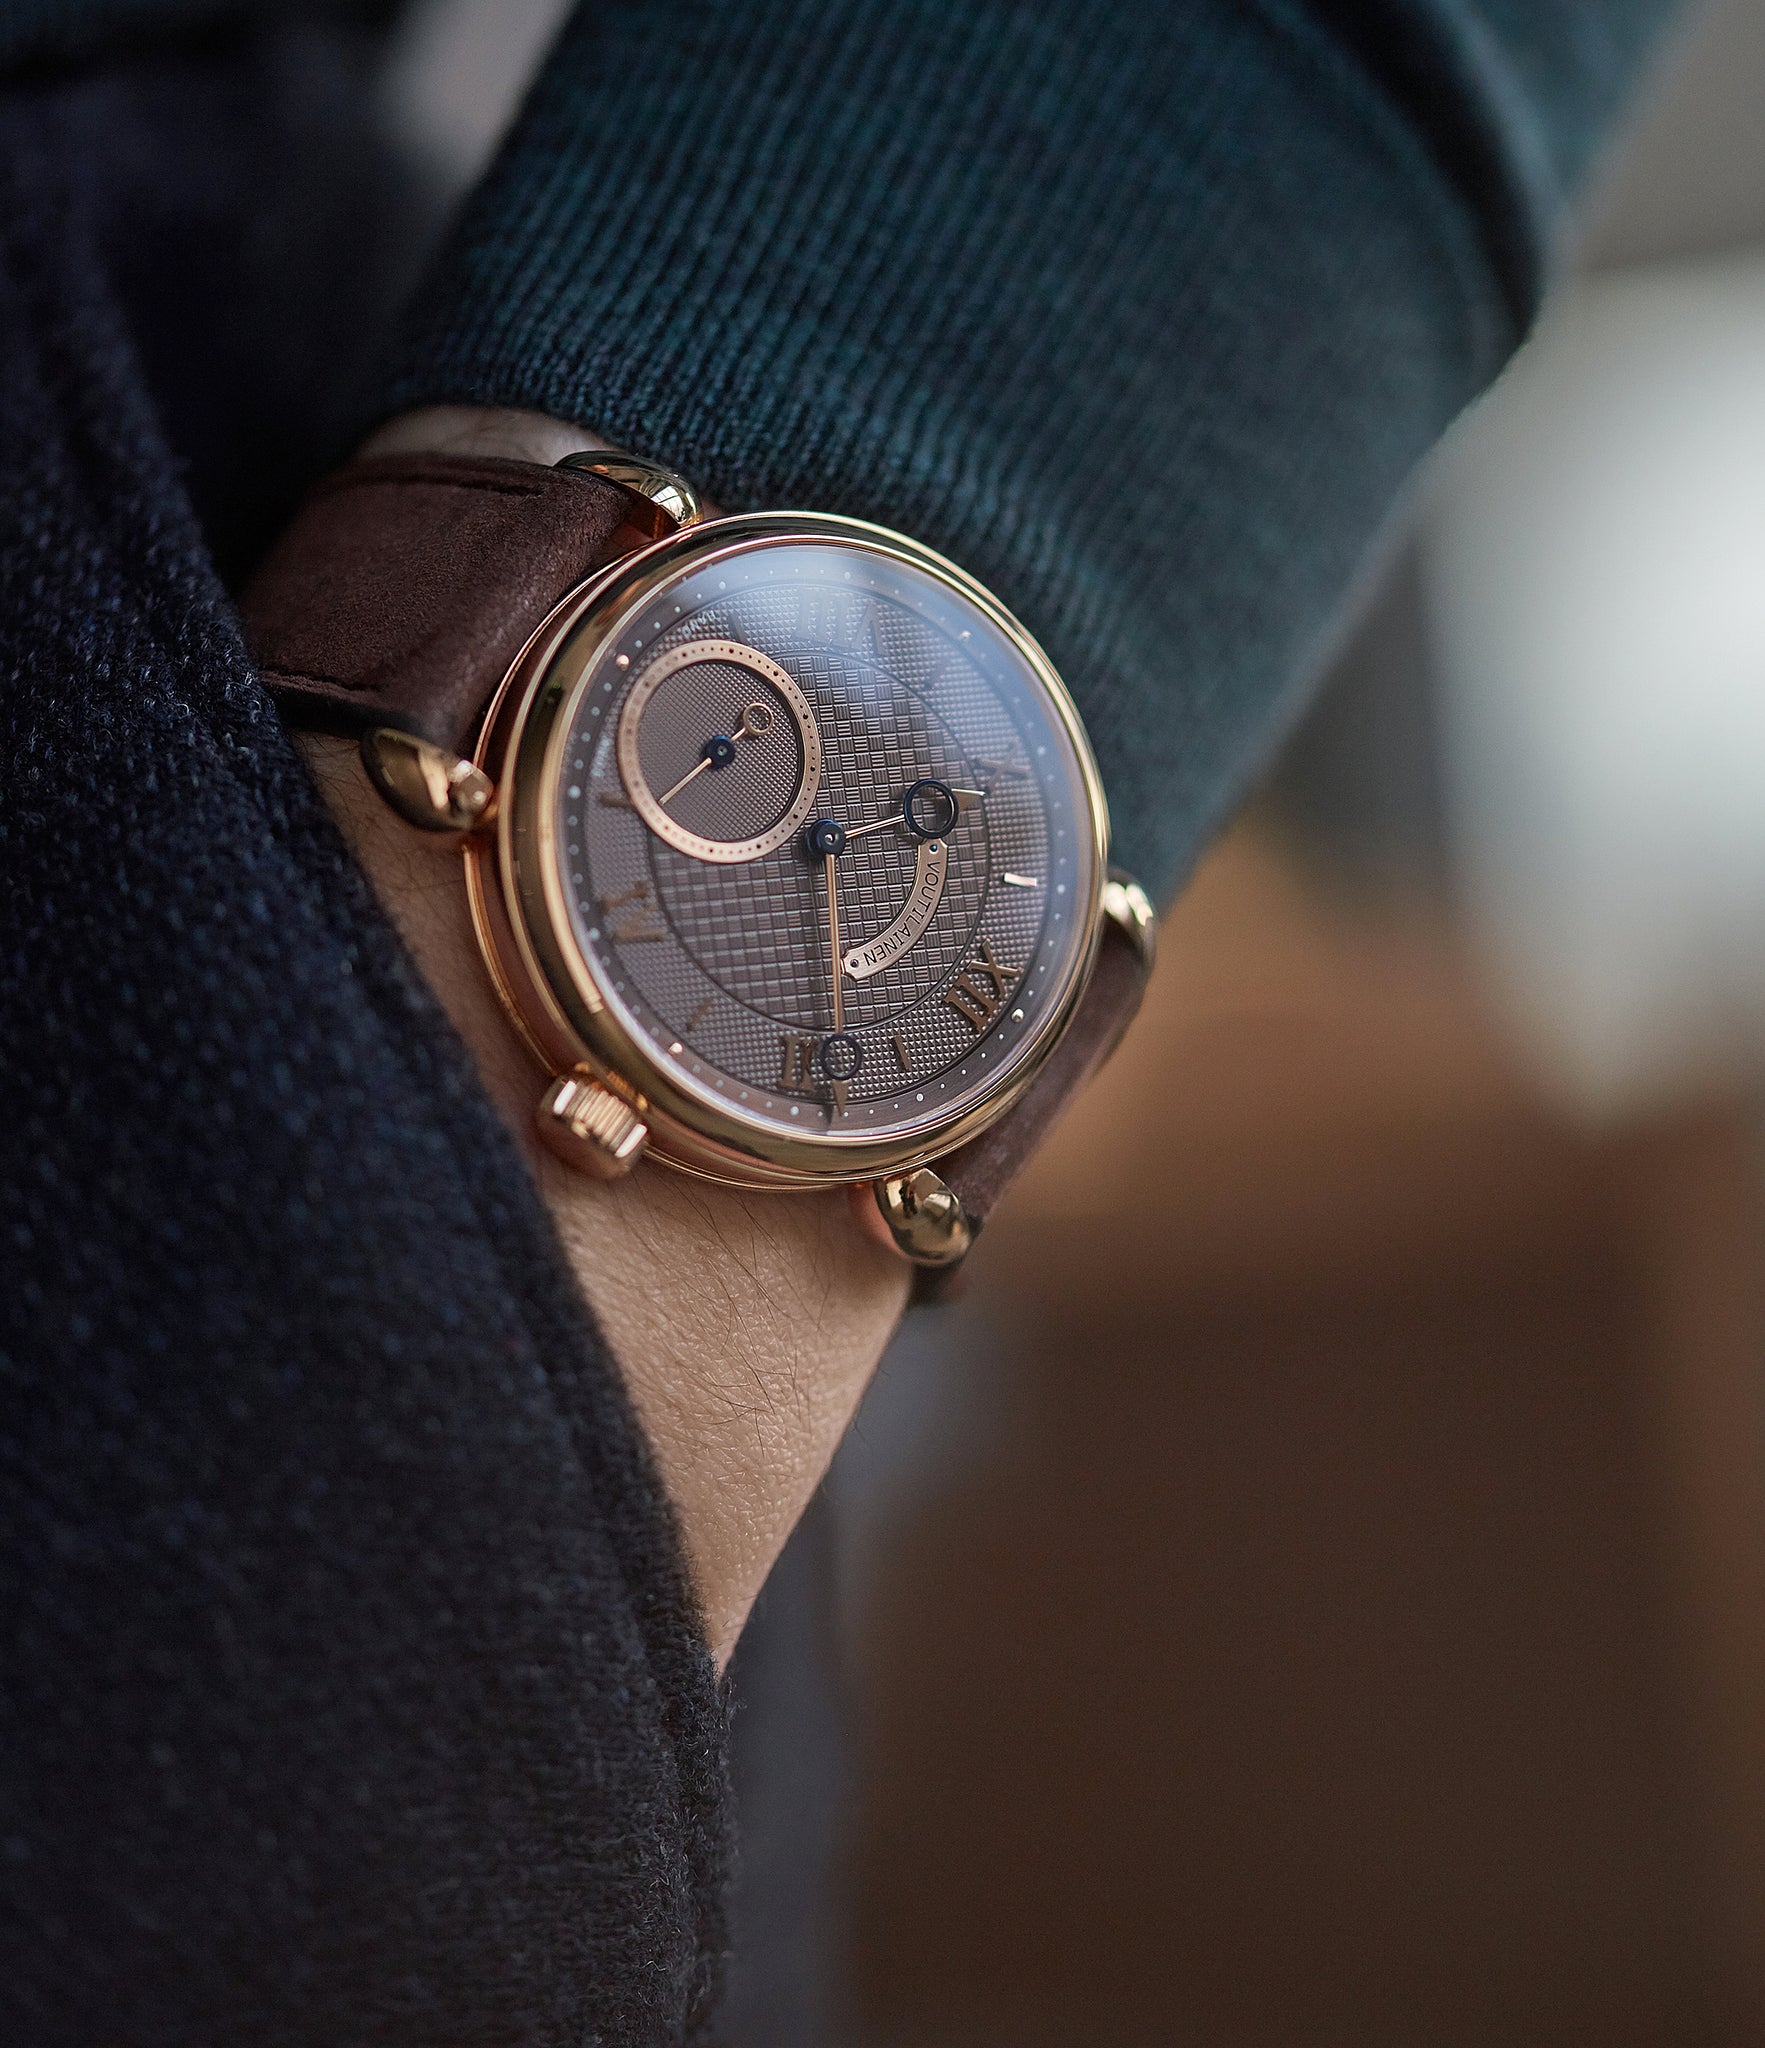 men's luxury wristwatch Voutilainen Vingt-8 Cal. 28 rose gold dress watch with brown guilloche dial for sale at A Collected Man London approved re-seller of preowned Voutilainen watches